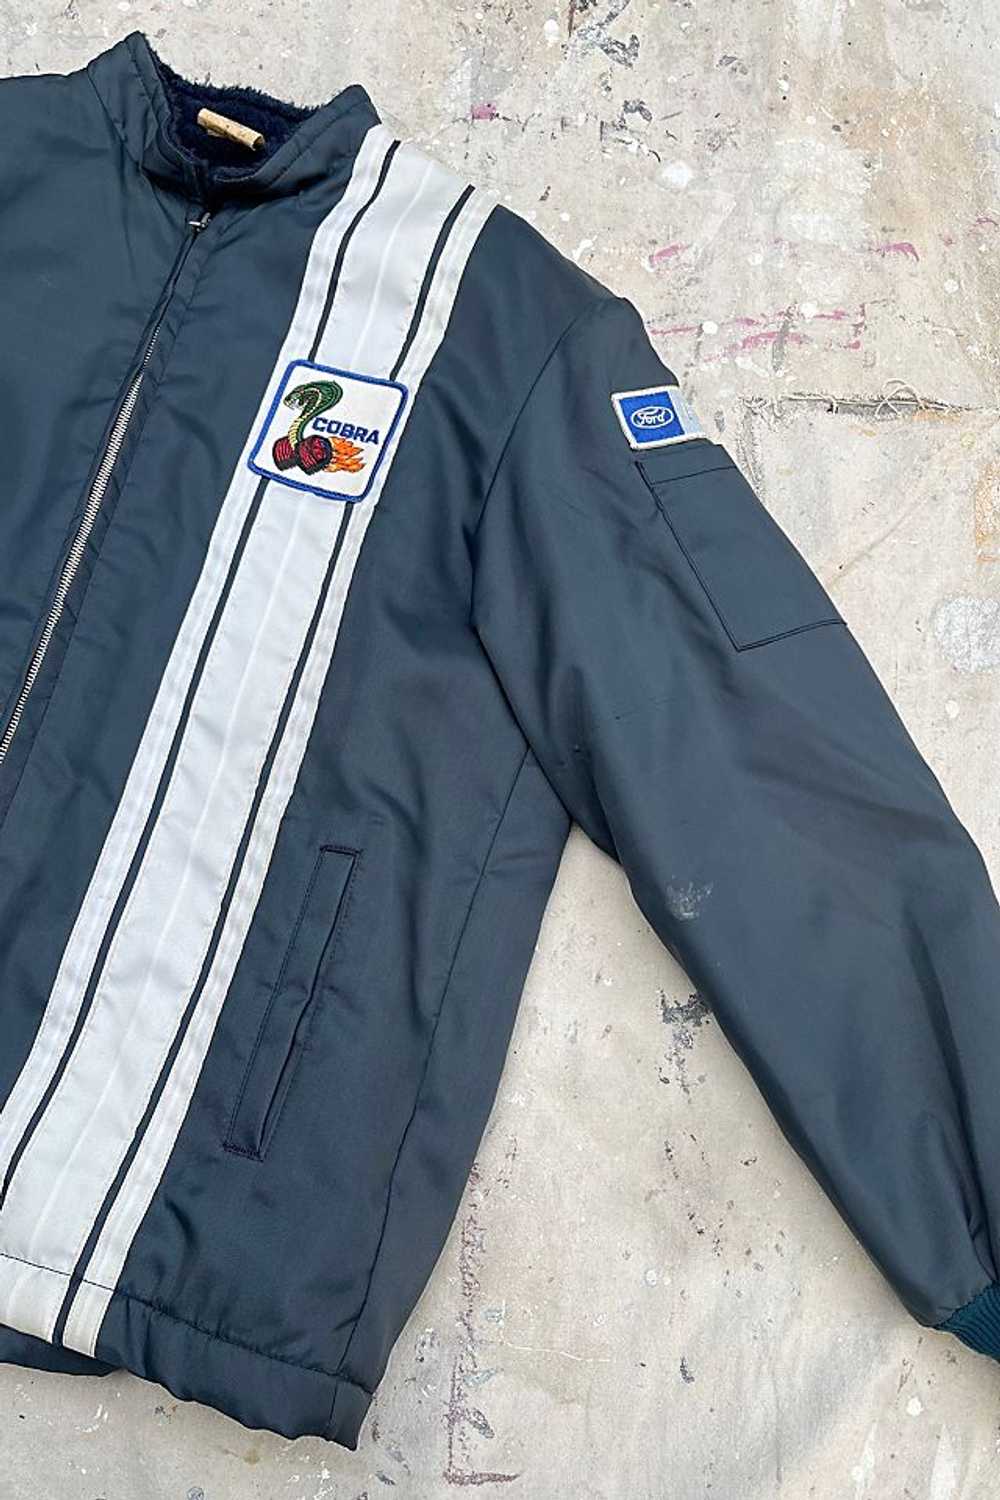 Vintage Ford Cobra Jacket Selected by Wax Plant - image 2